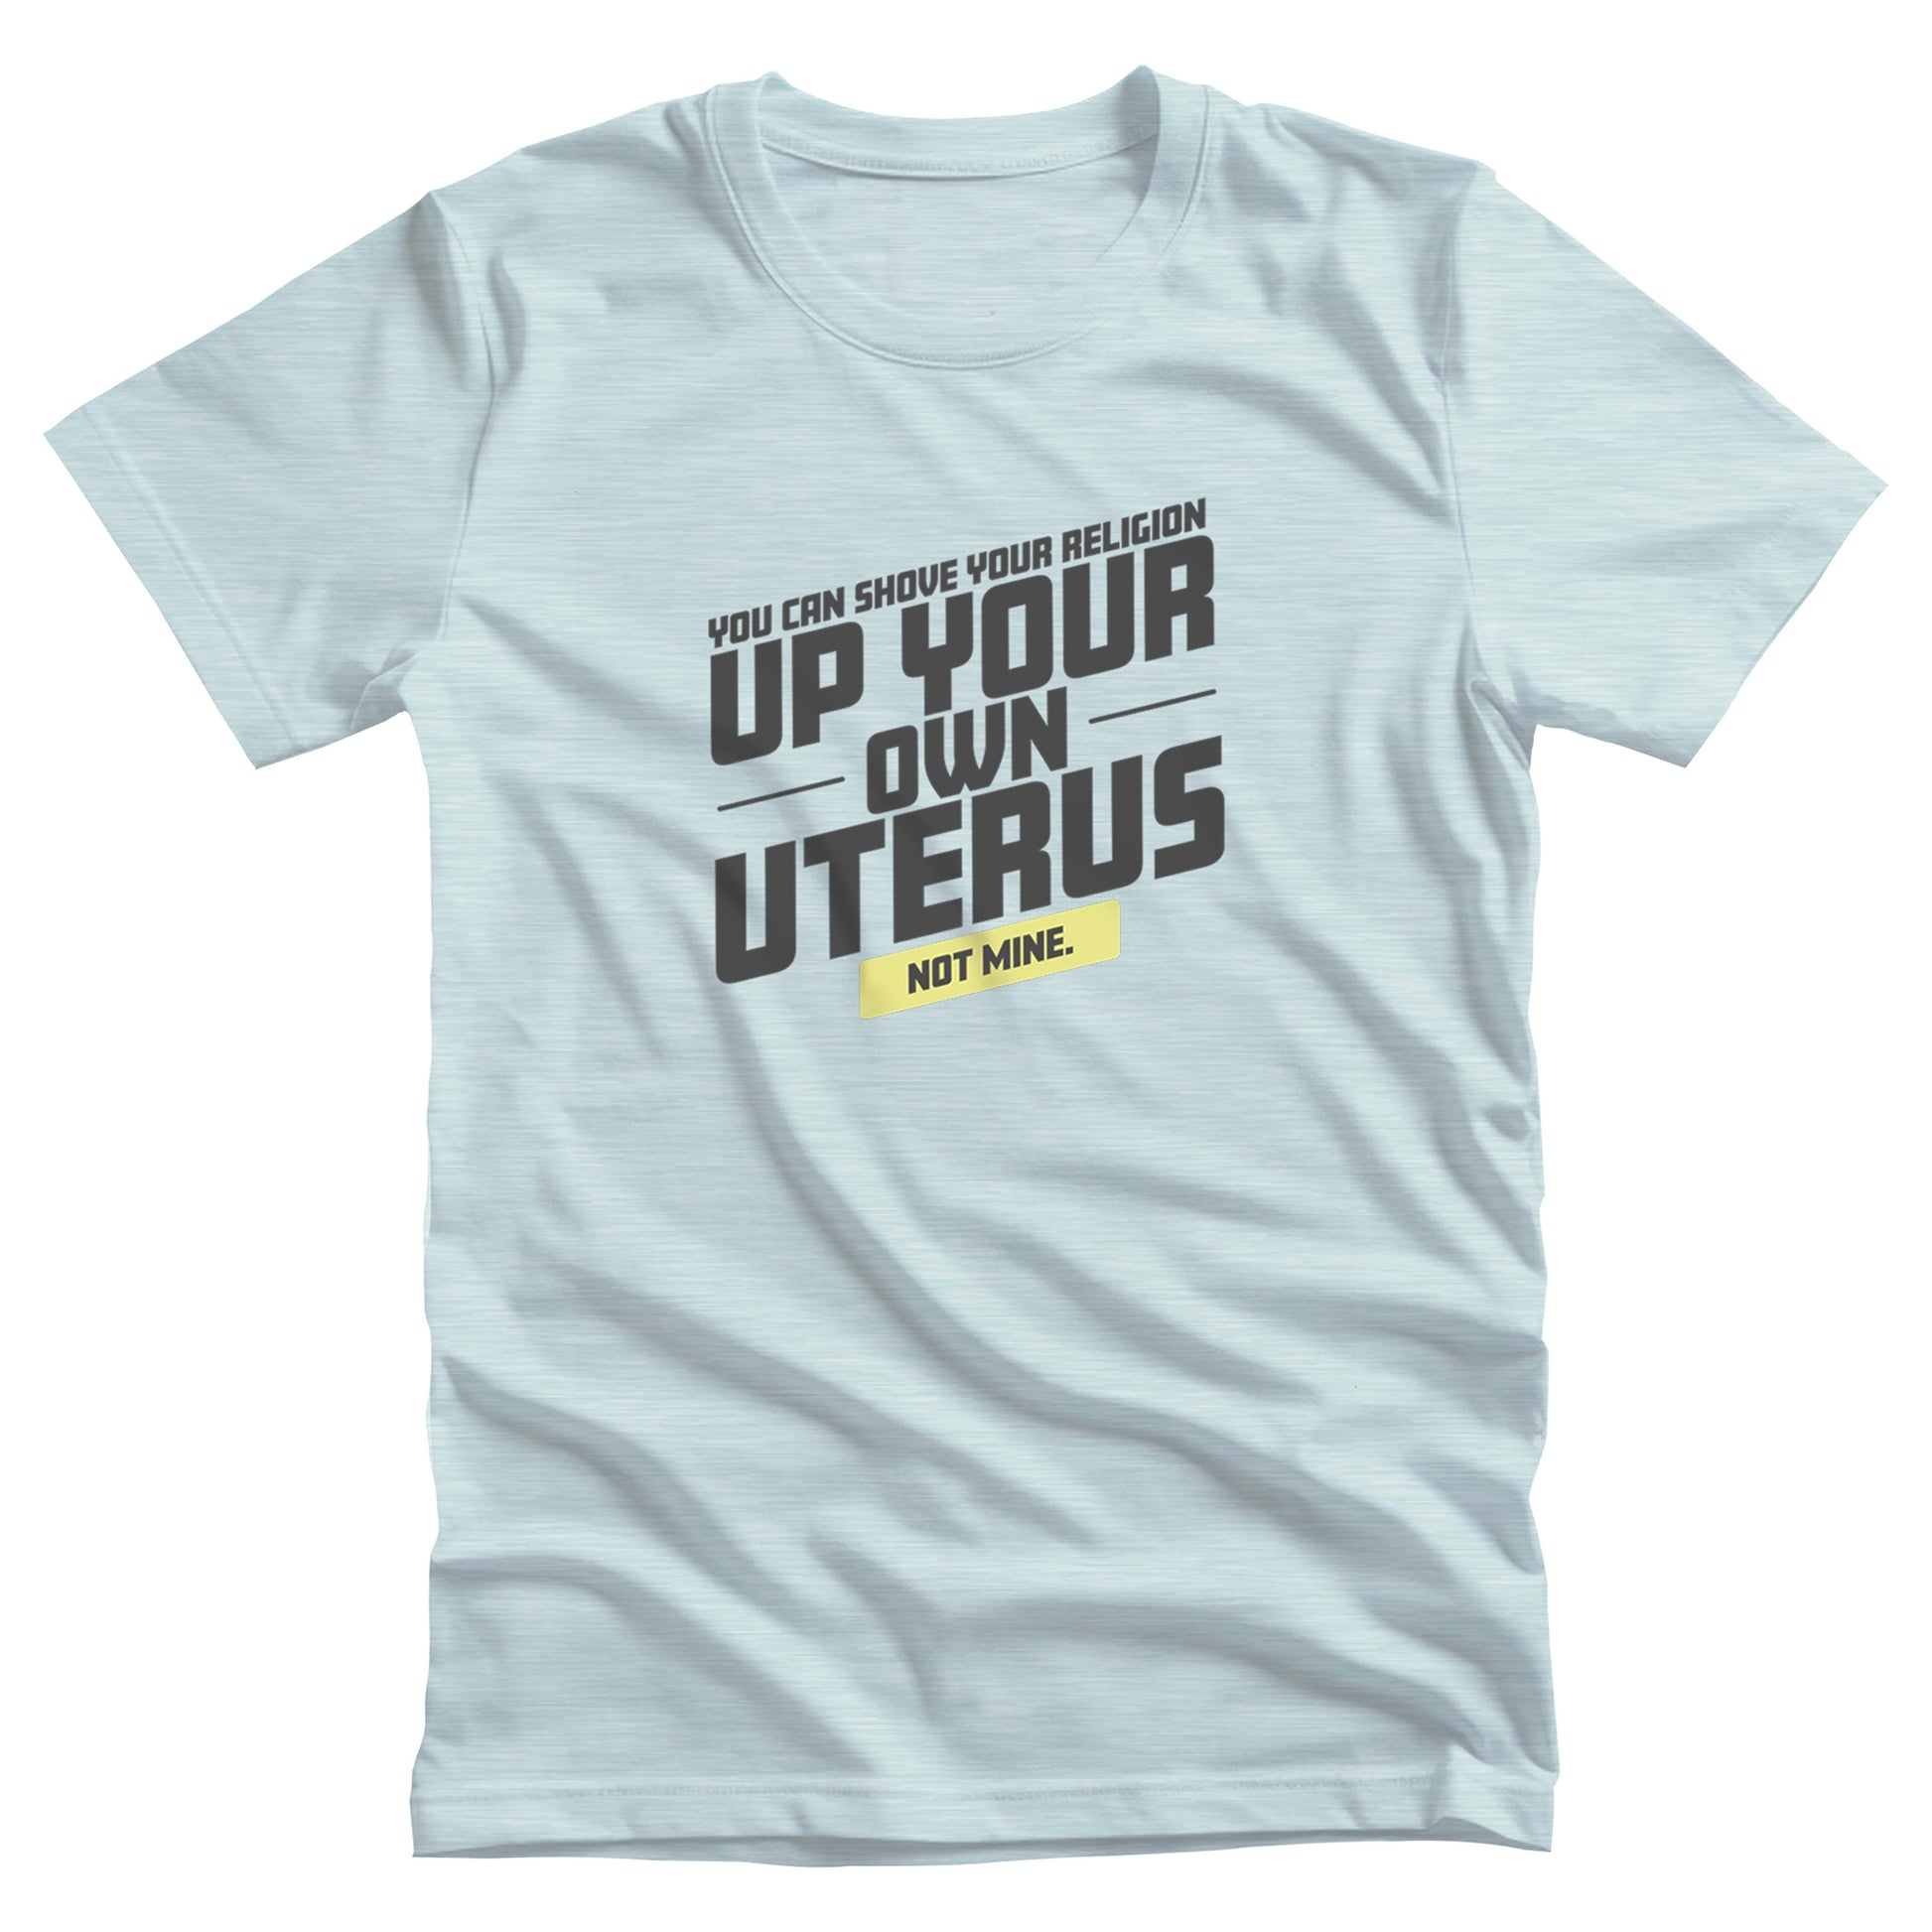 Heather Ice Blue color unisex t-shirt that says, “You Can Shove Your Religion Up Your Own Uterus, Not Mine.” The text is all slanted upwards, and the words “Not Mine” are in a yellow rectangle.